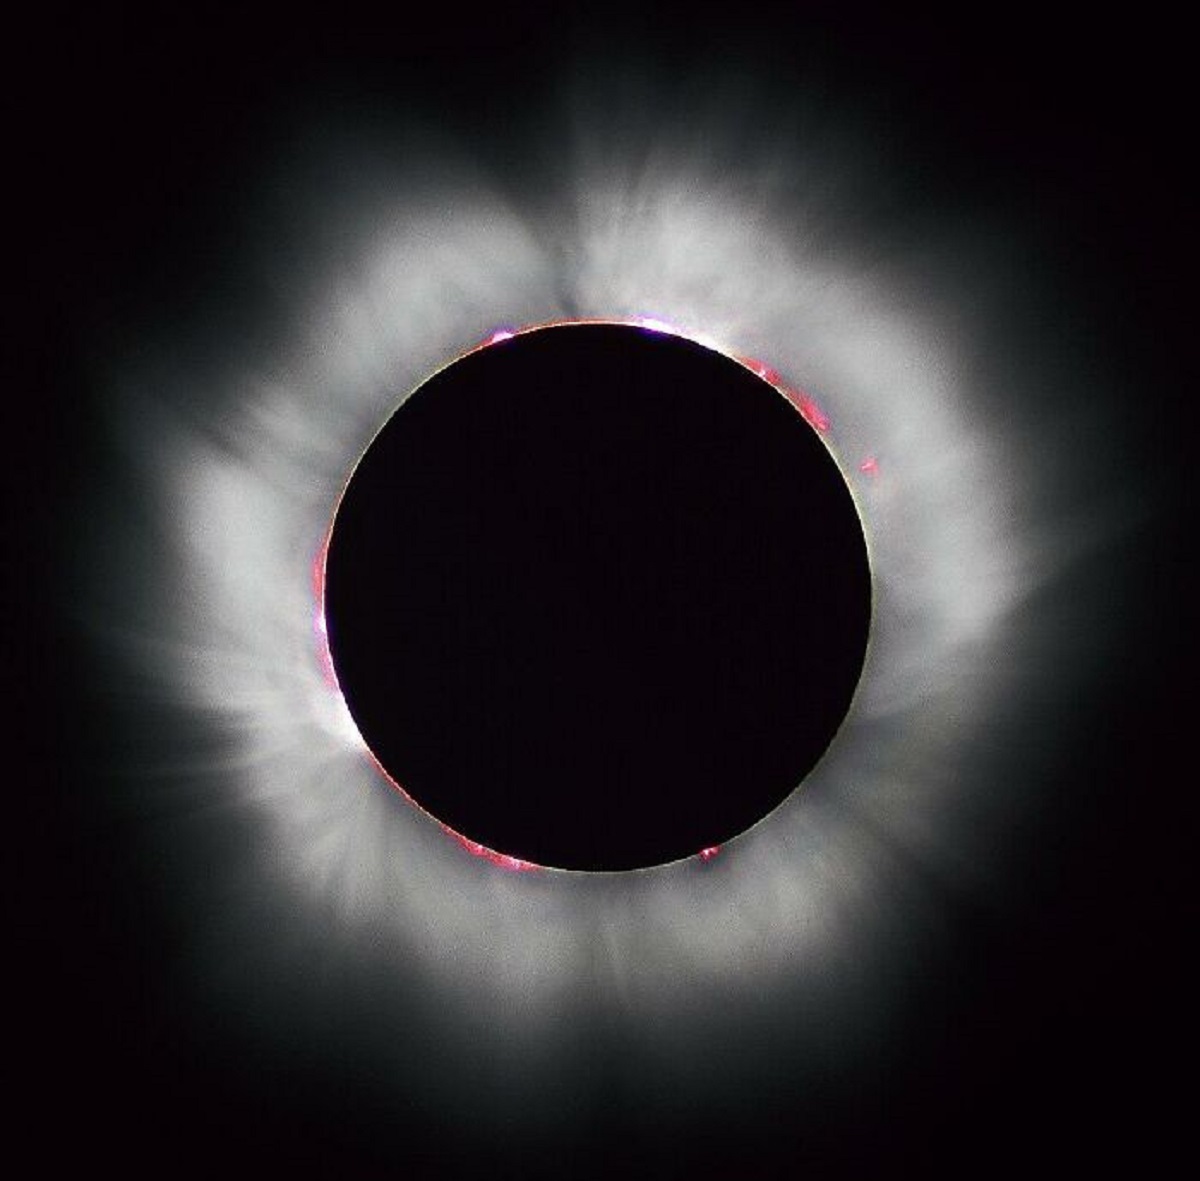 That following the solar eclipse of August 11 1999, the BMJ reported only 14 cases of eye damage from improper viewing of the eclipse, a number lower than initially feared. In one of the most serious cases the patient had looked at the Sun without eye protection for 20 minutes.